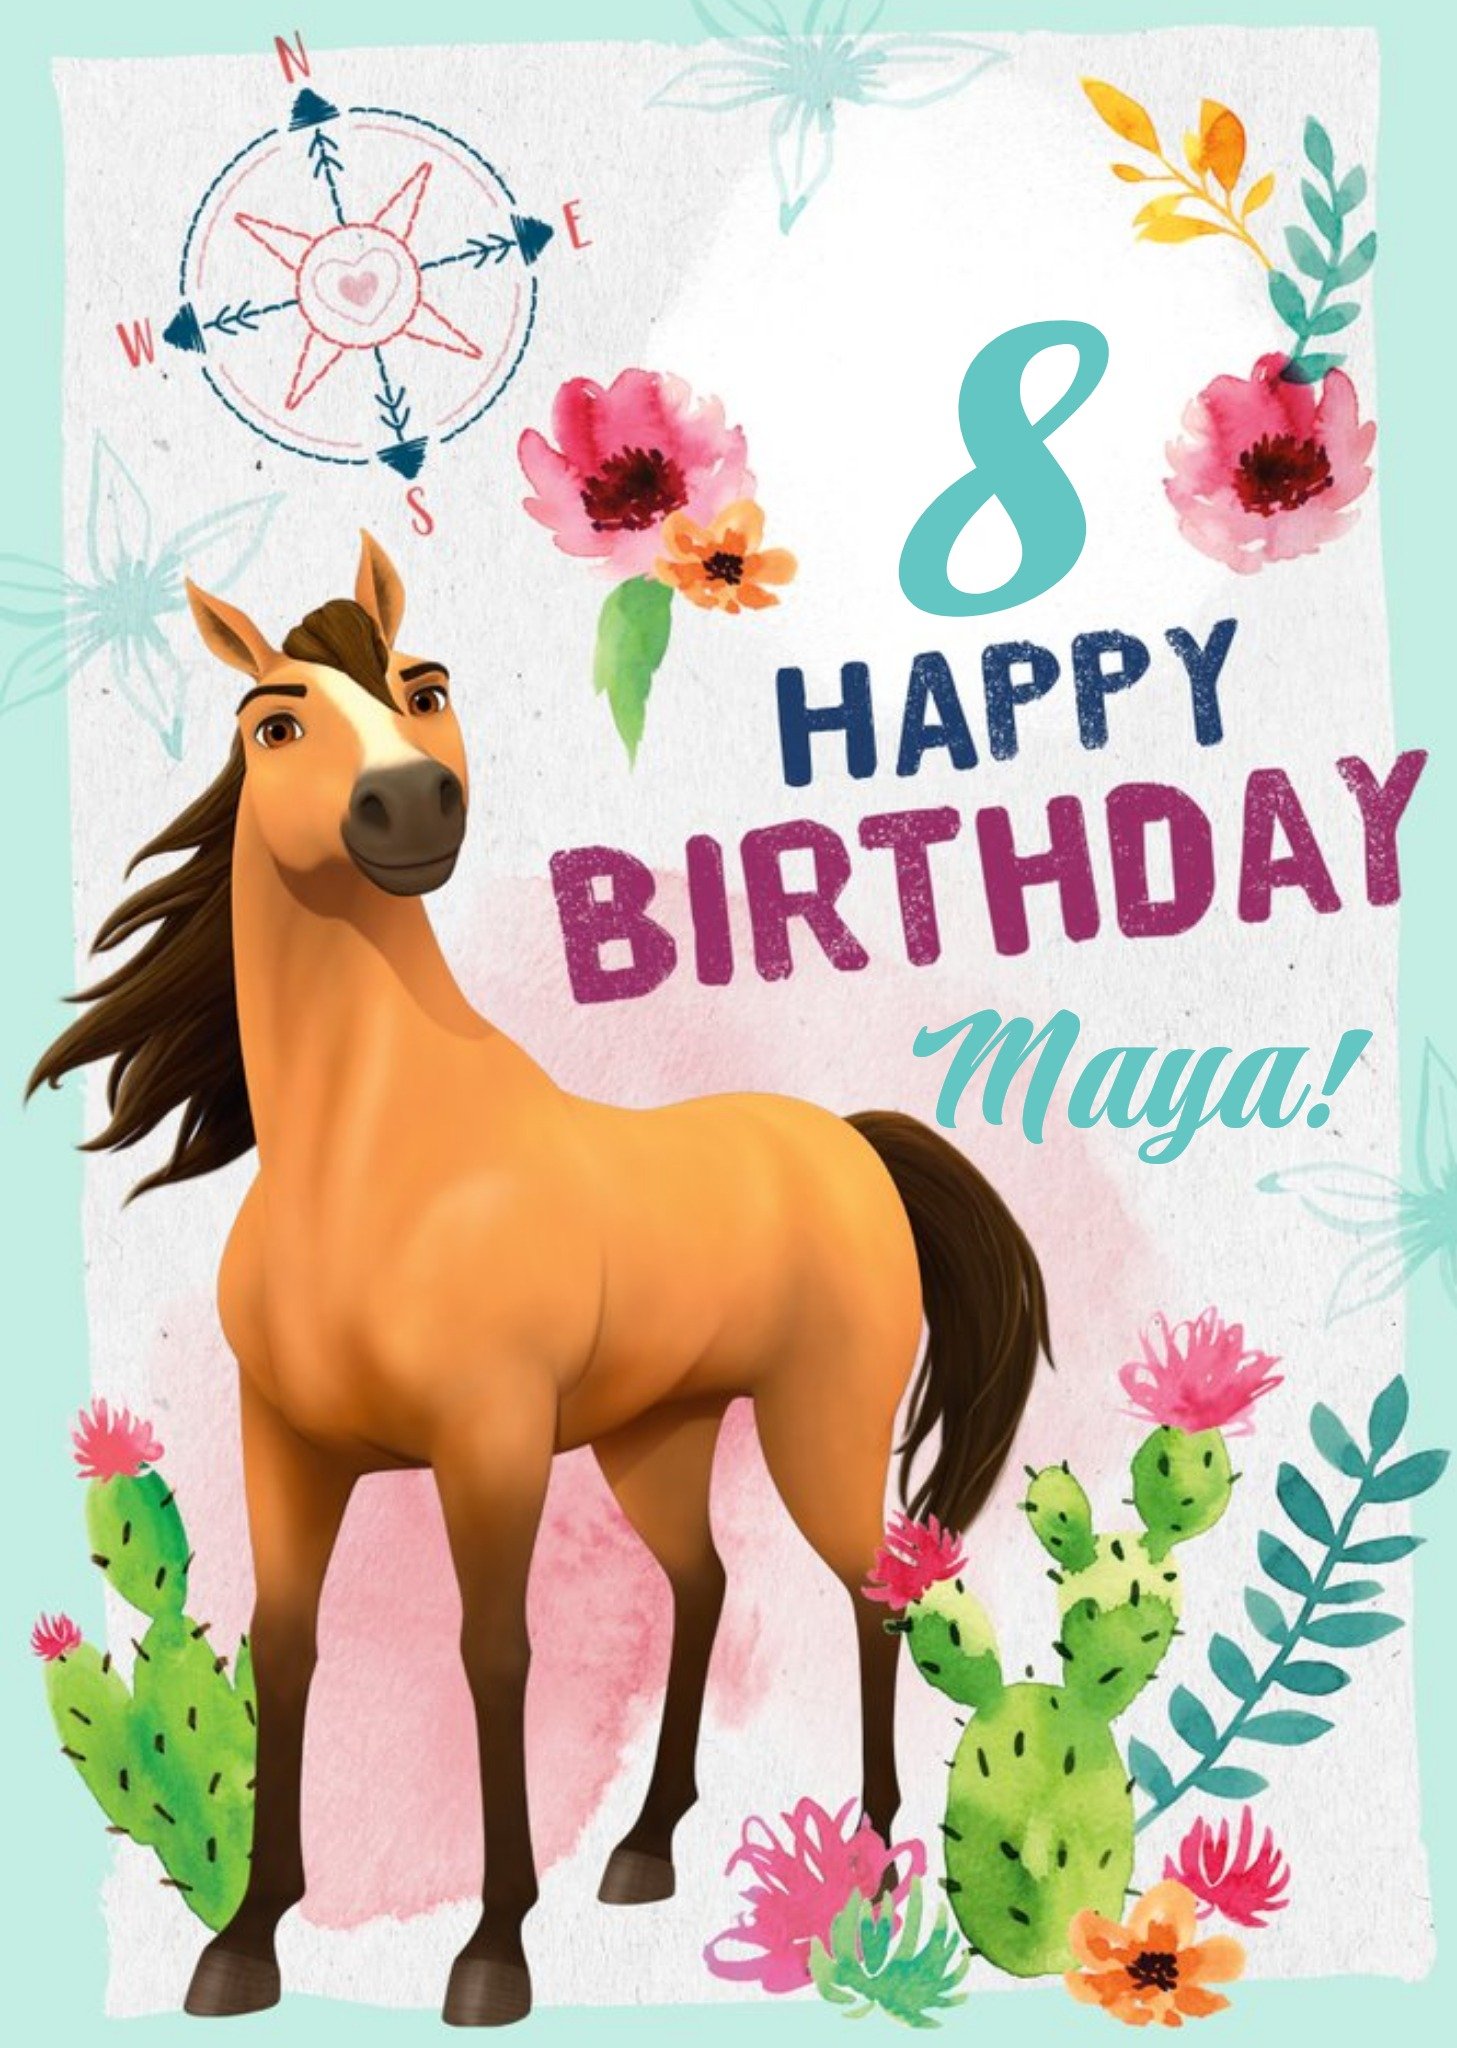 Other Universal Dreamworks Spirit the Horse Riding Free 8th Birthday Card, Large